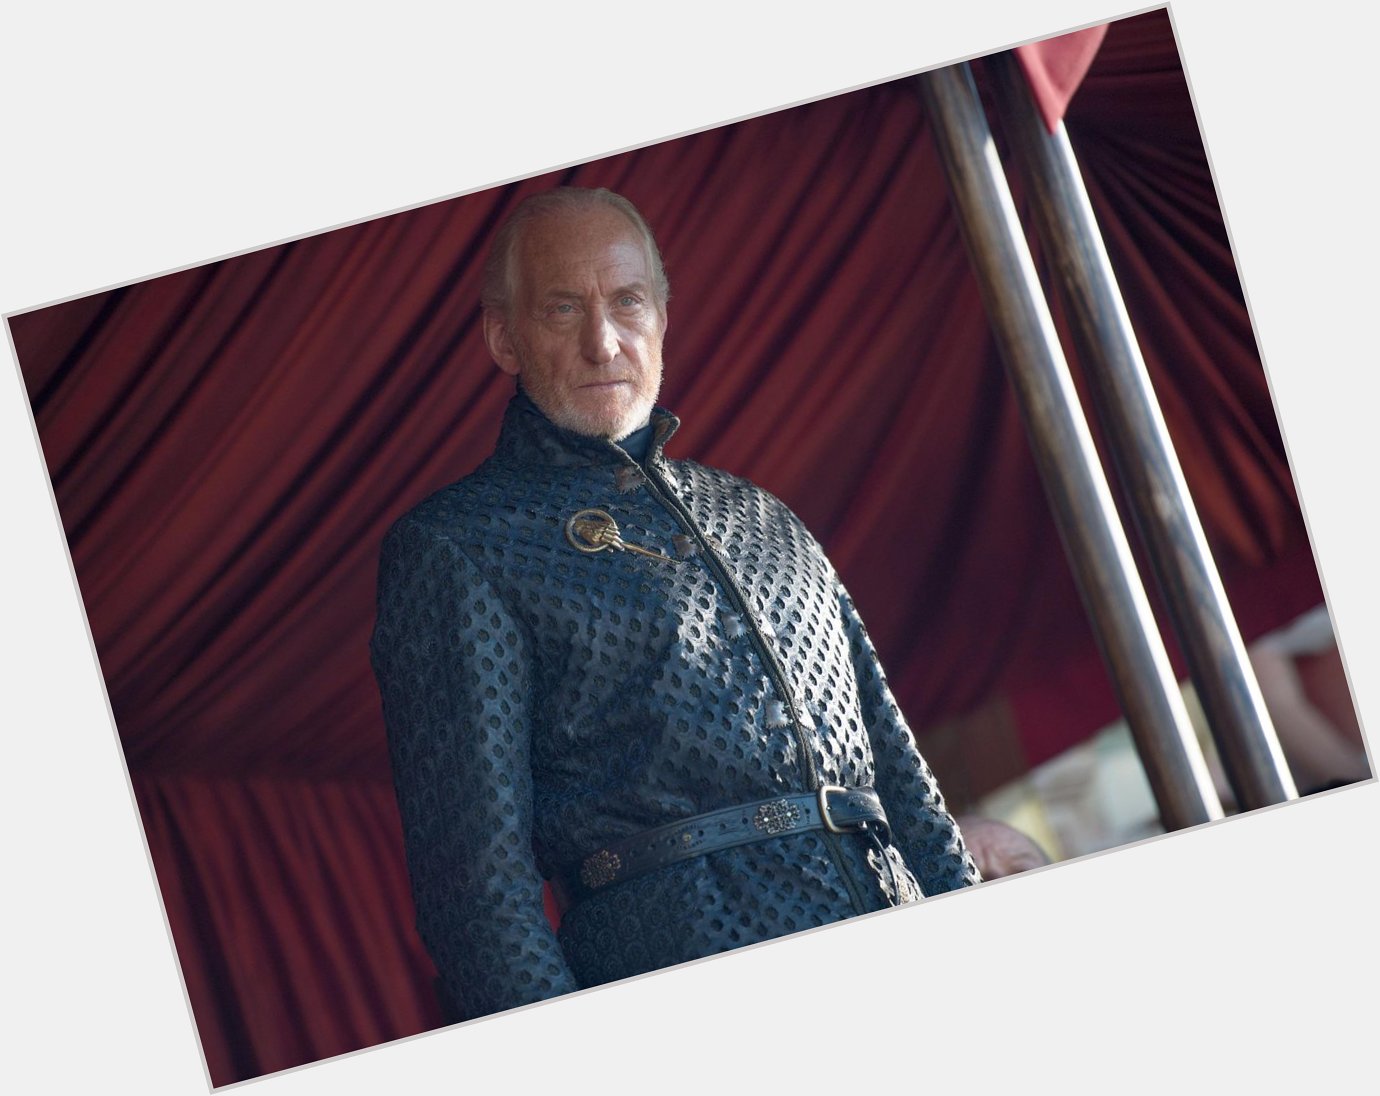 Oh Lord of Casterly Rock - it\s only Charles Dance\s birthday today! Happy birthday Tywin! 